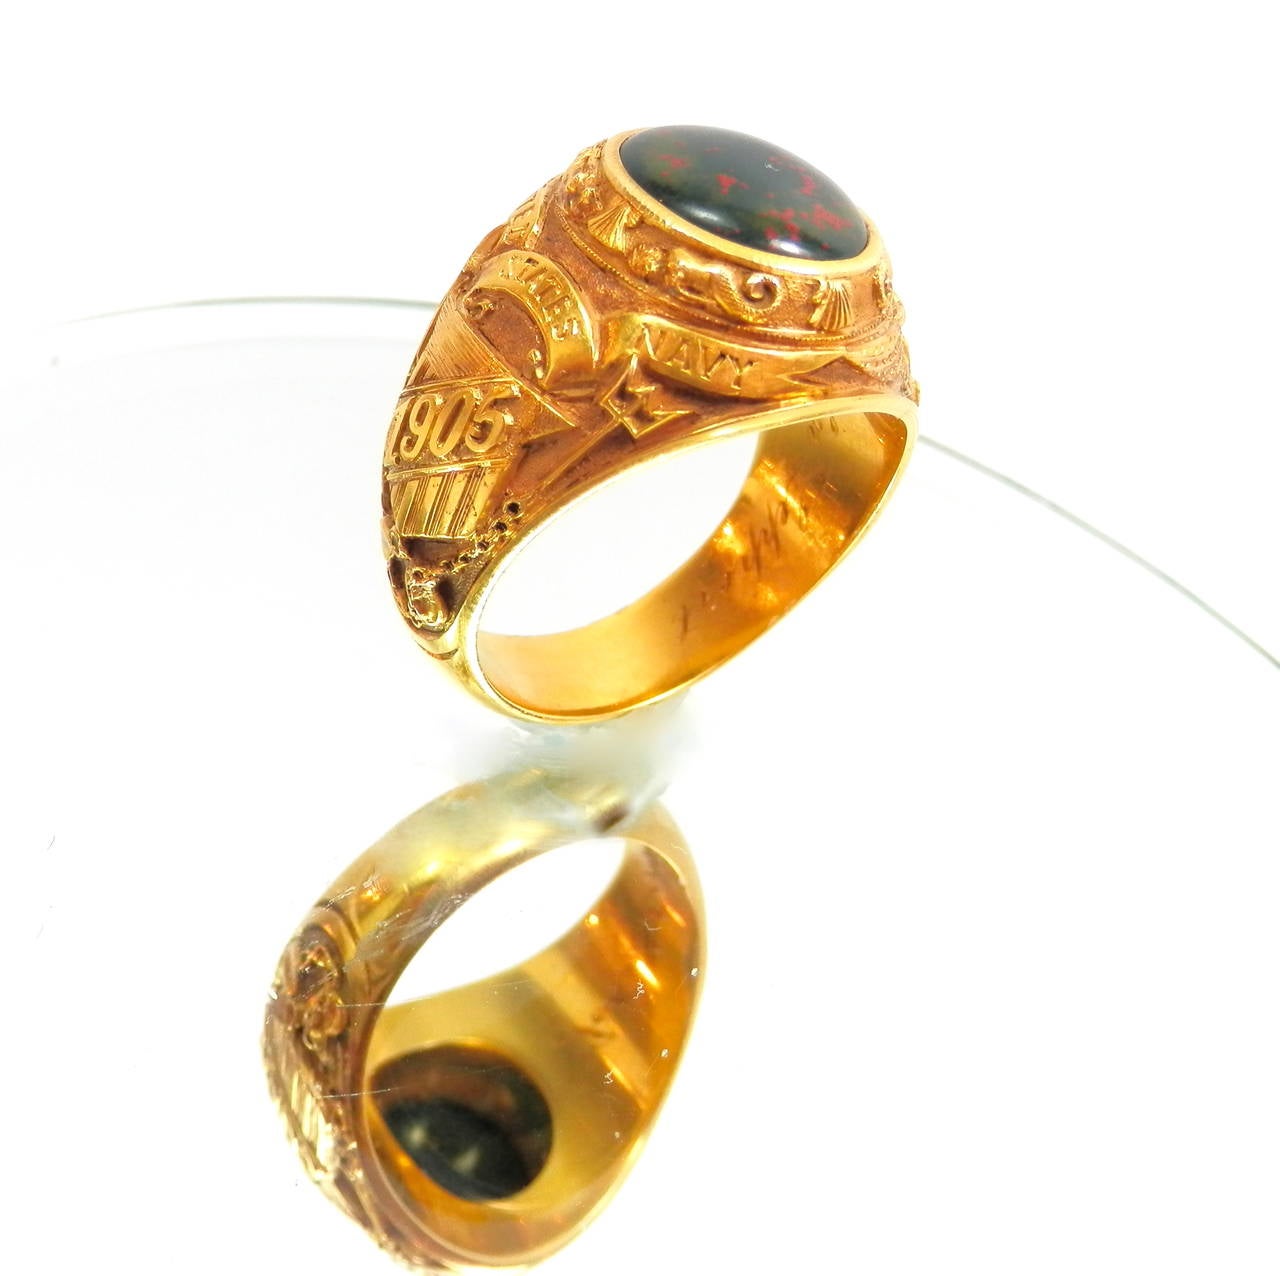 Circa 1905 U.S. Navy ring with high relief carving in 14K and with an acid finish (appears 18K)  The ring centers an oval cabochon bloodstone and with an engraving inside.  In near pristine condition where is a complex design containing 4 mermaids,